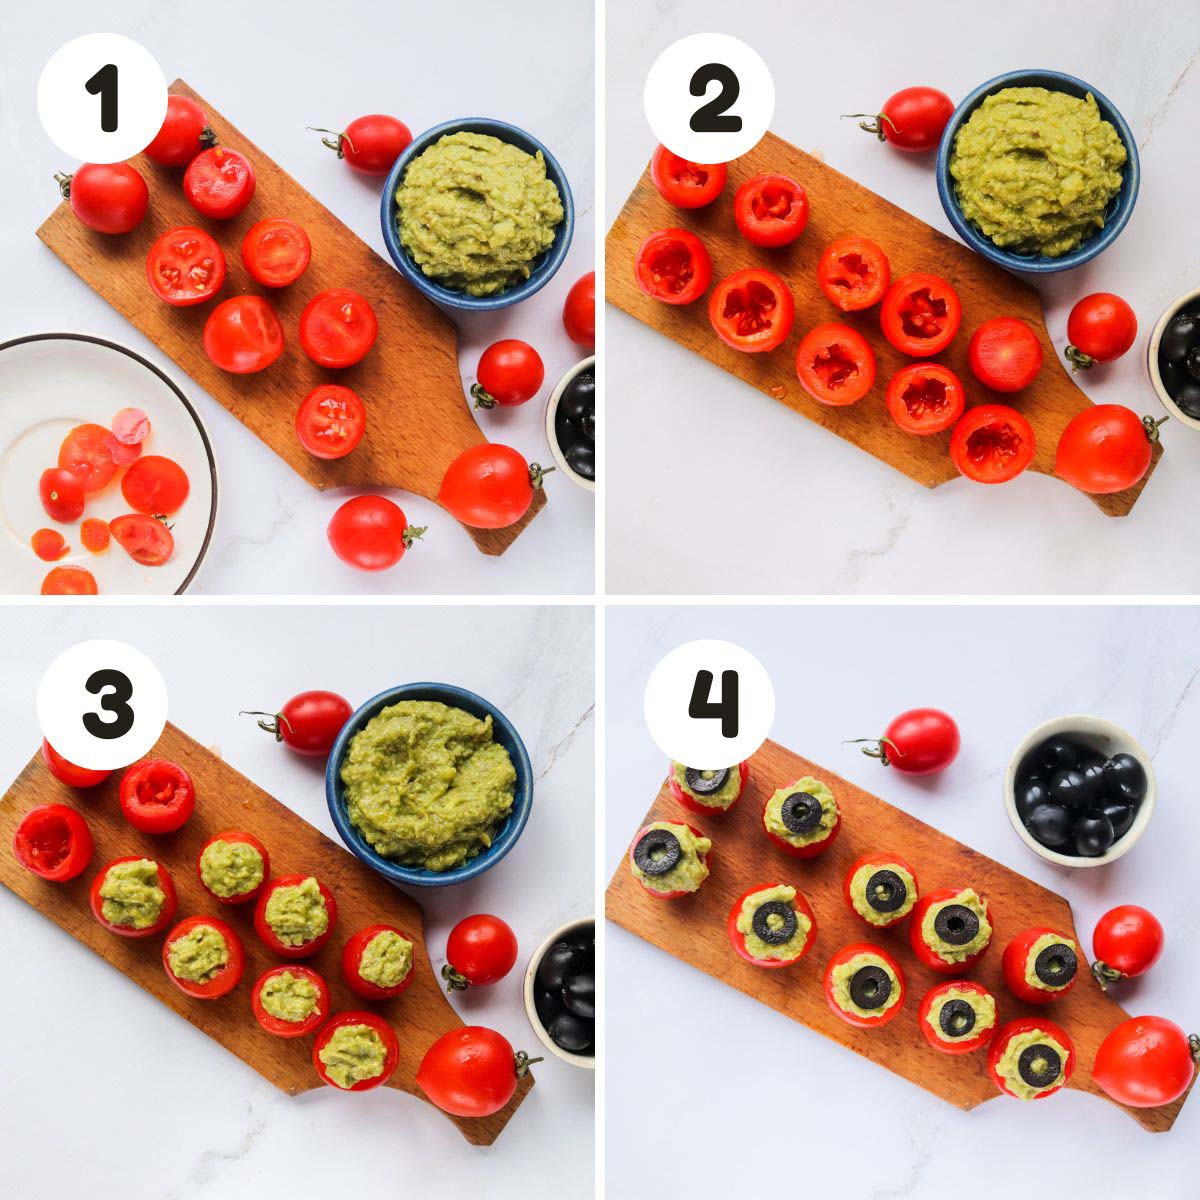 Steps to make the guacamole tomatoes.